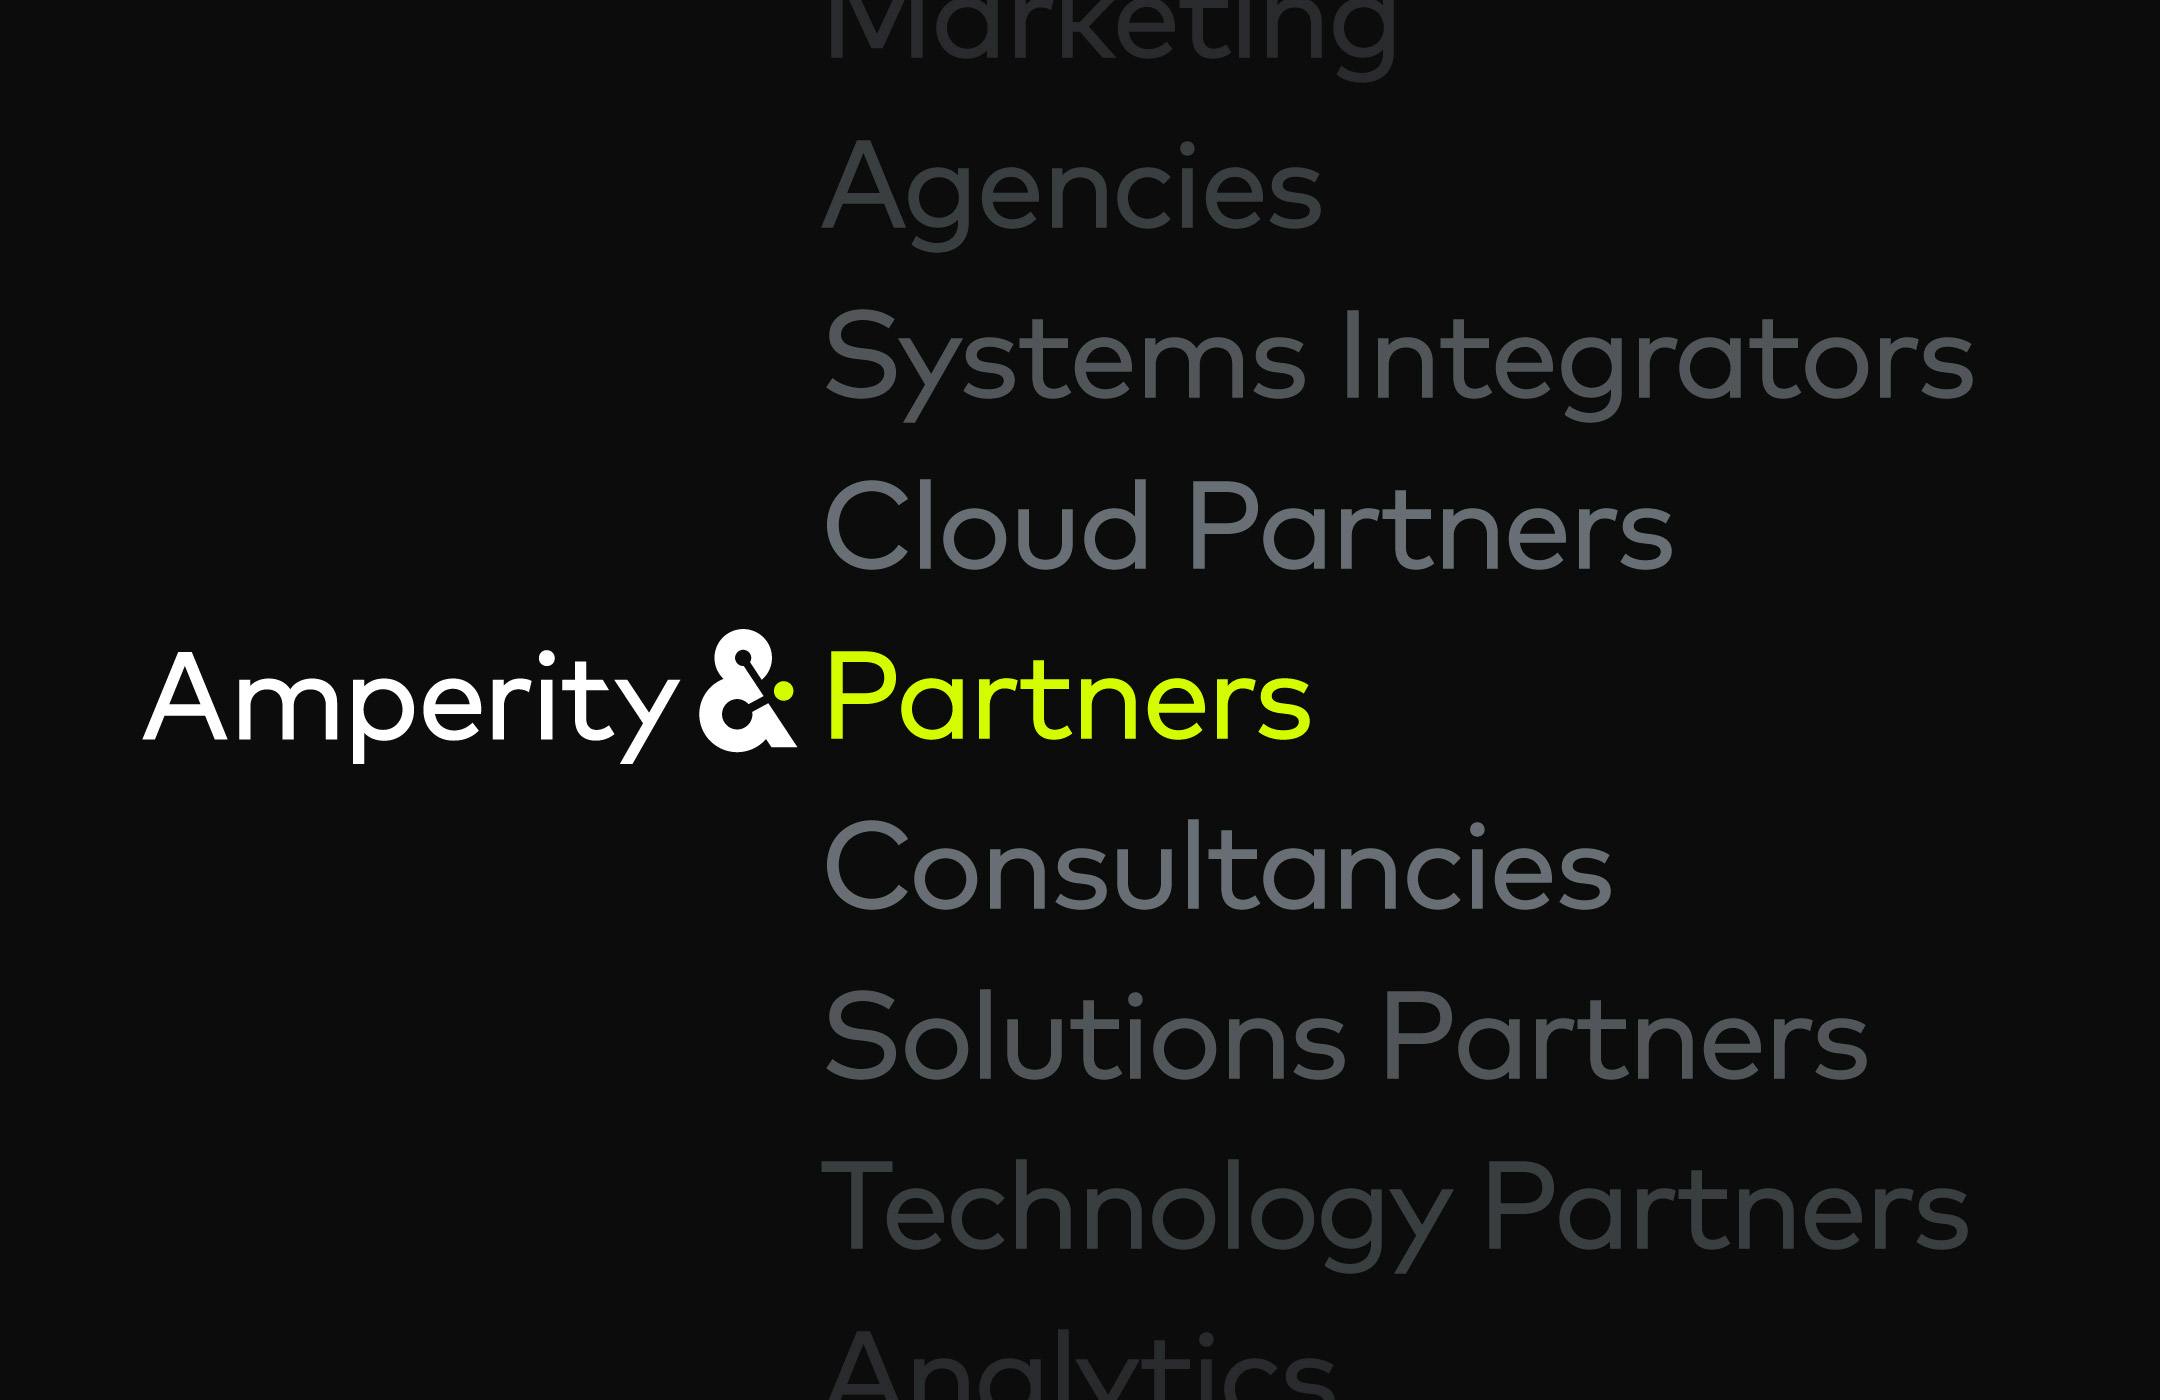 Amperity & Partners